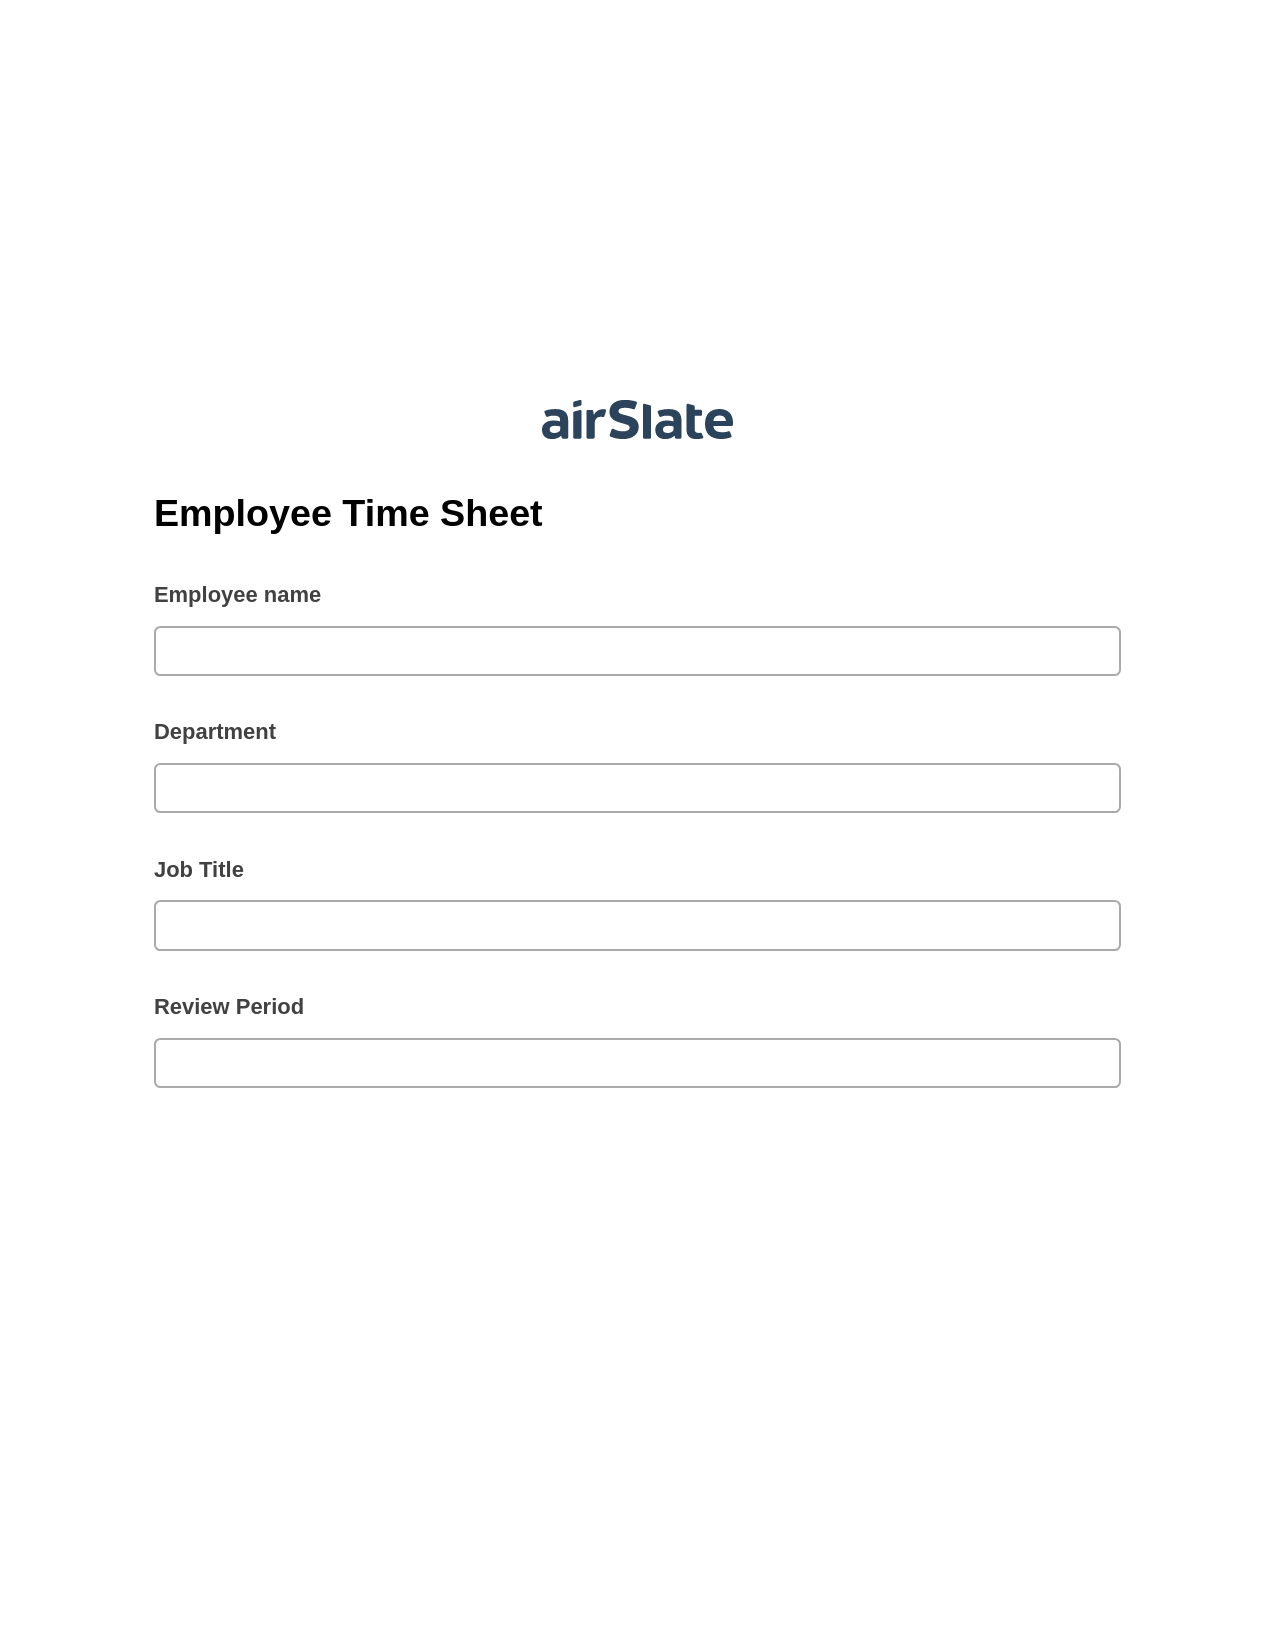 Multirole Employee Time Sheet Pre-fill from another Slate Bot, Update Audit Trail Bot, Email Notification Postfinish Bot